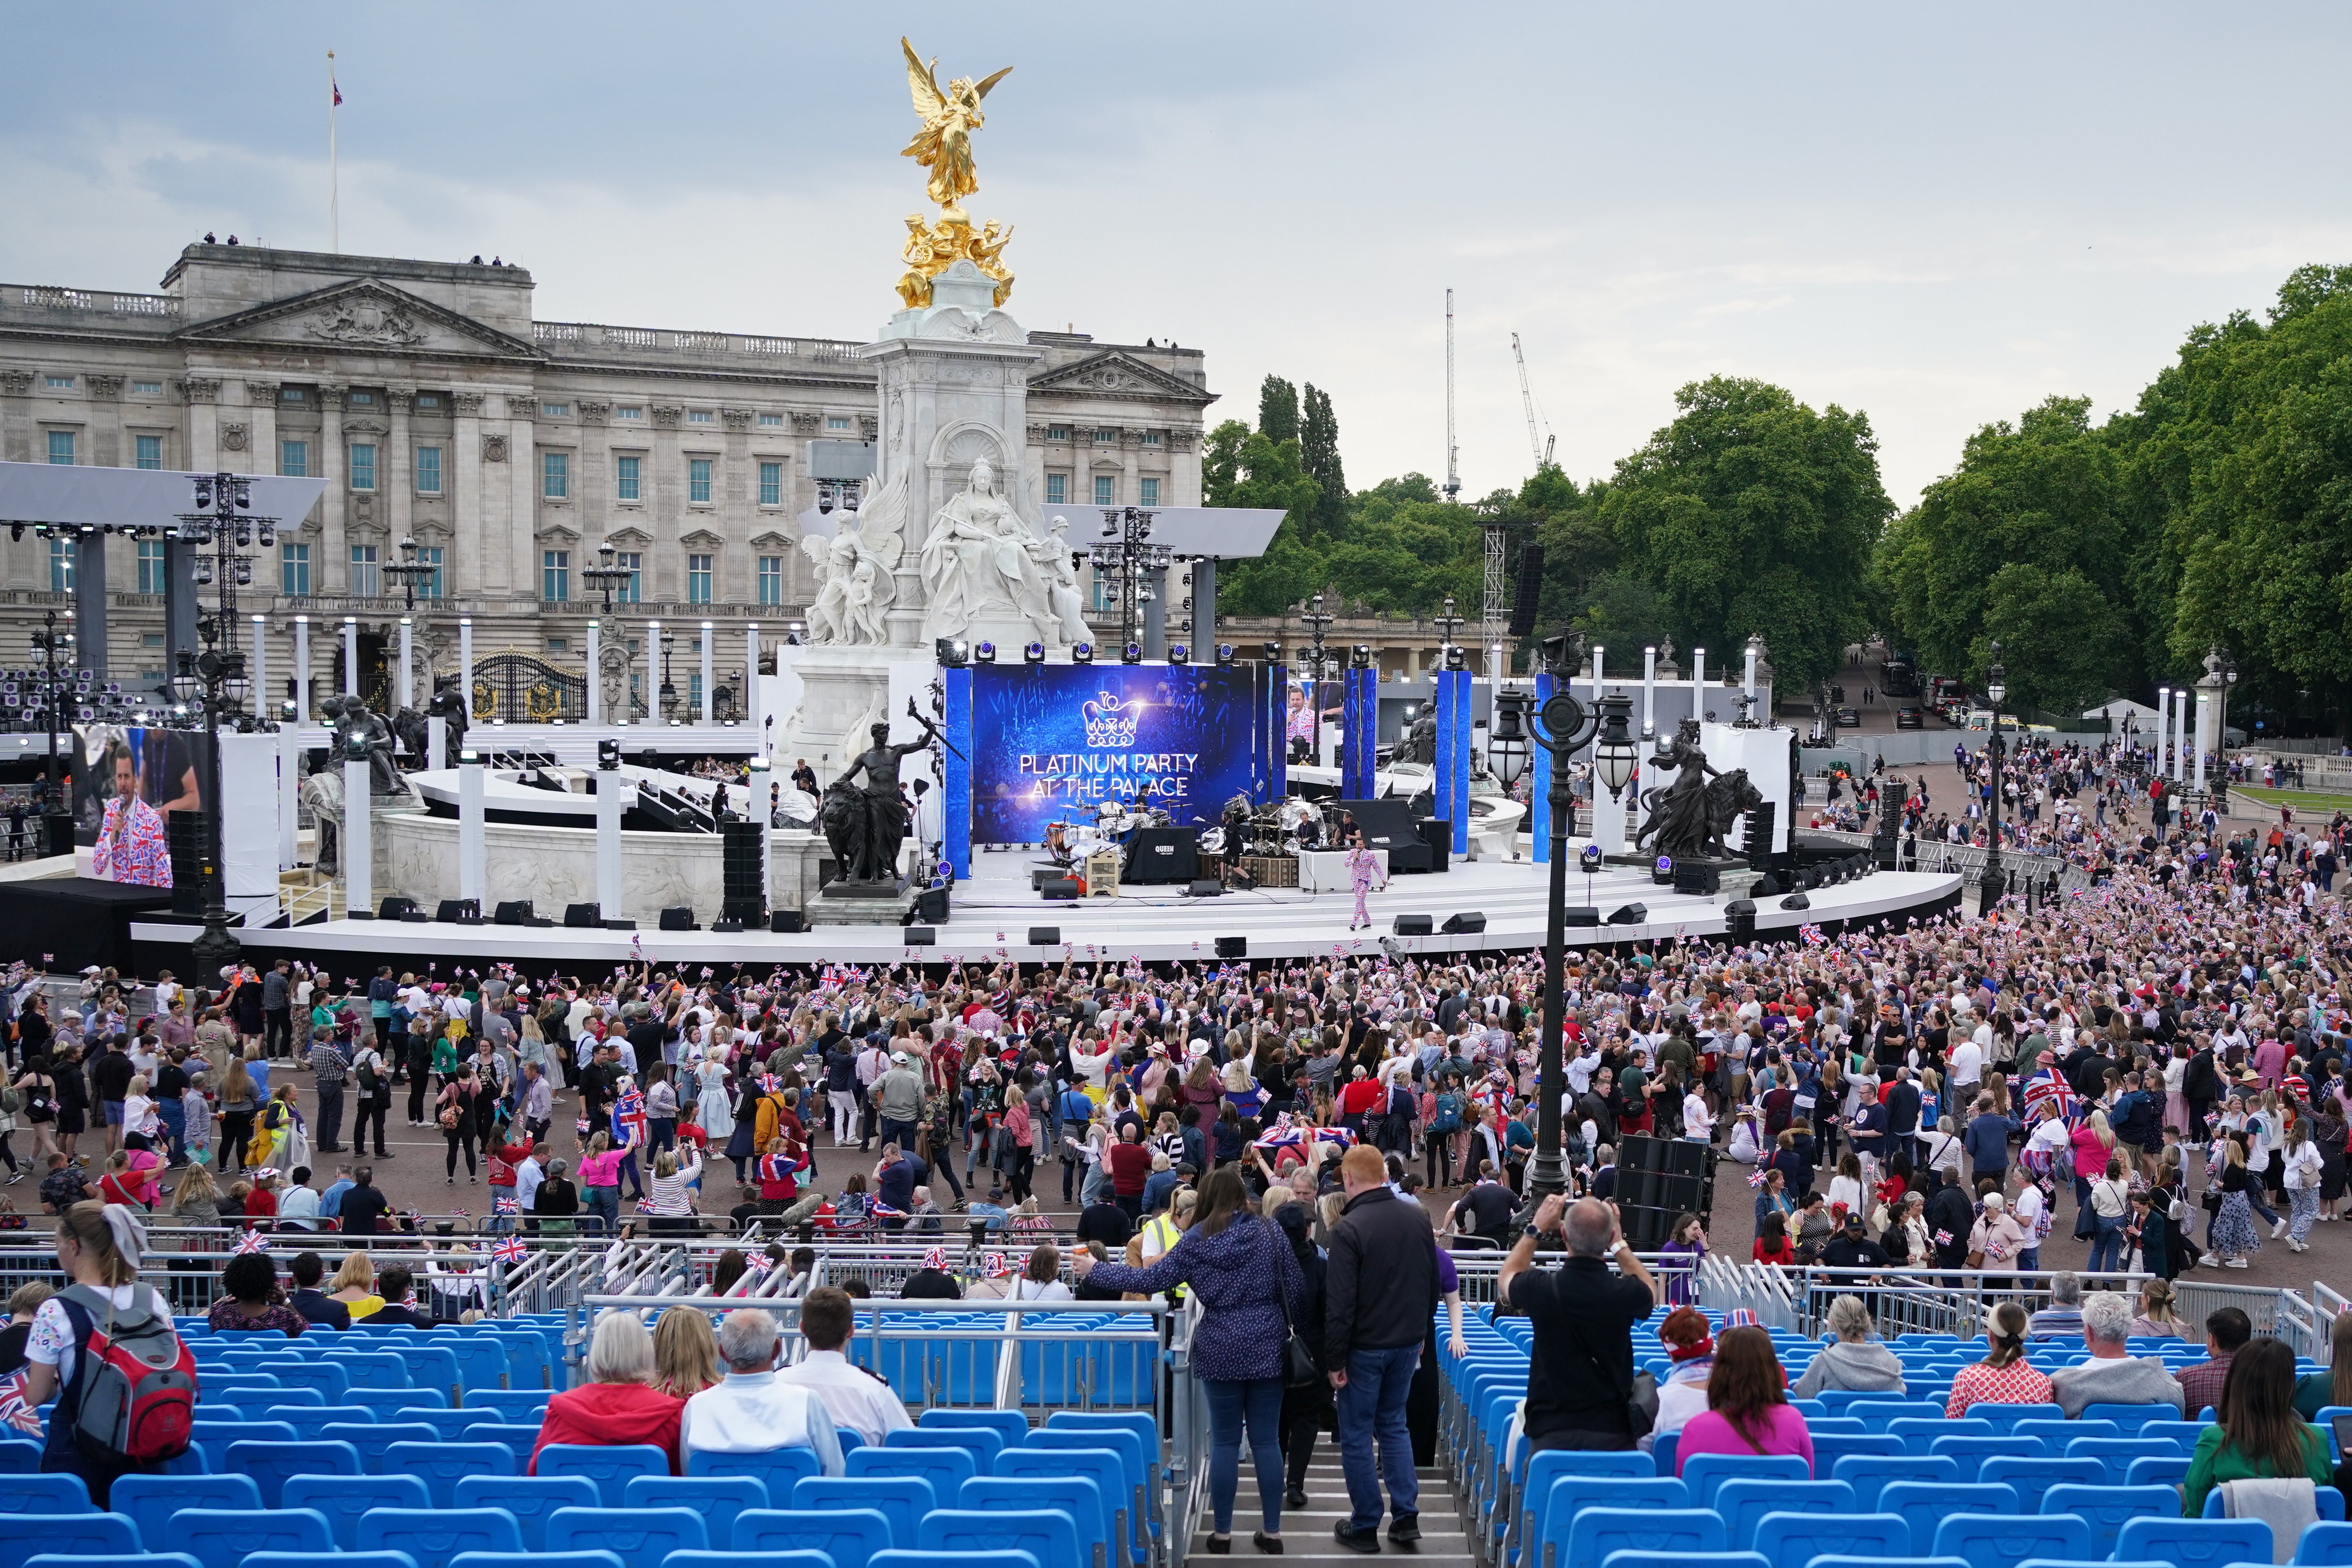 The crowd arriving before the start of the Platinum Party at the Palace in front of Buckingham Palace (Jacob King/PA)